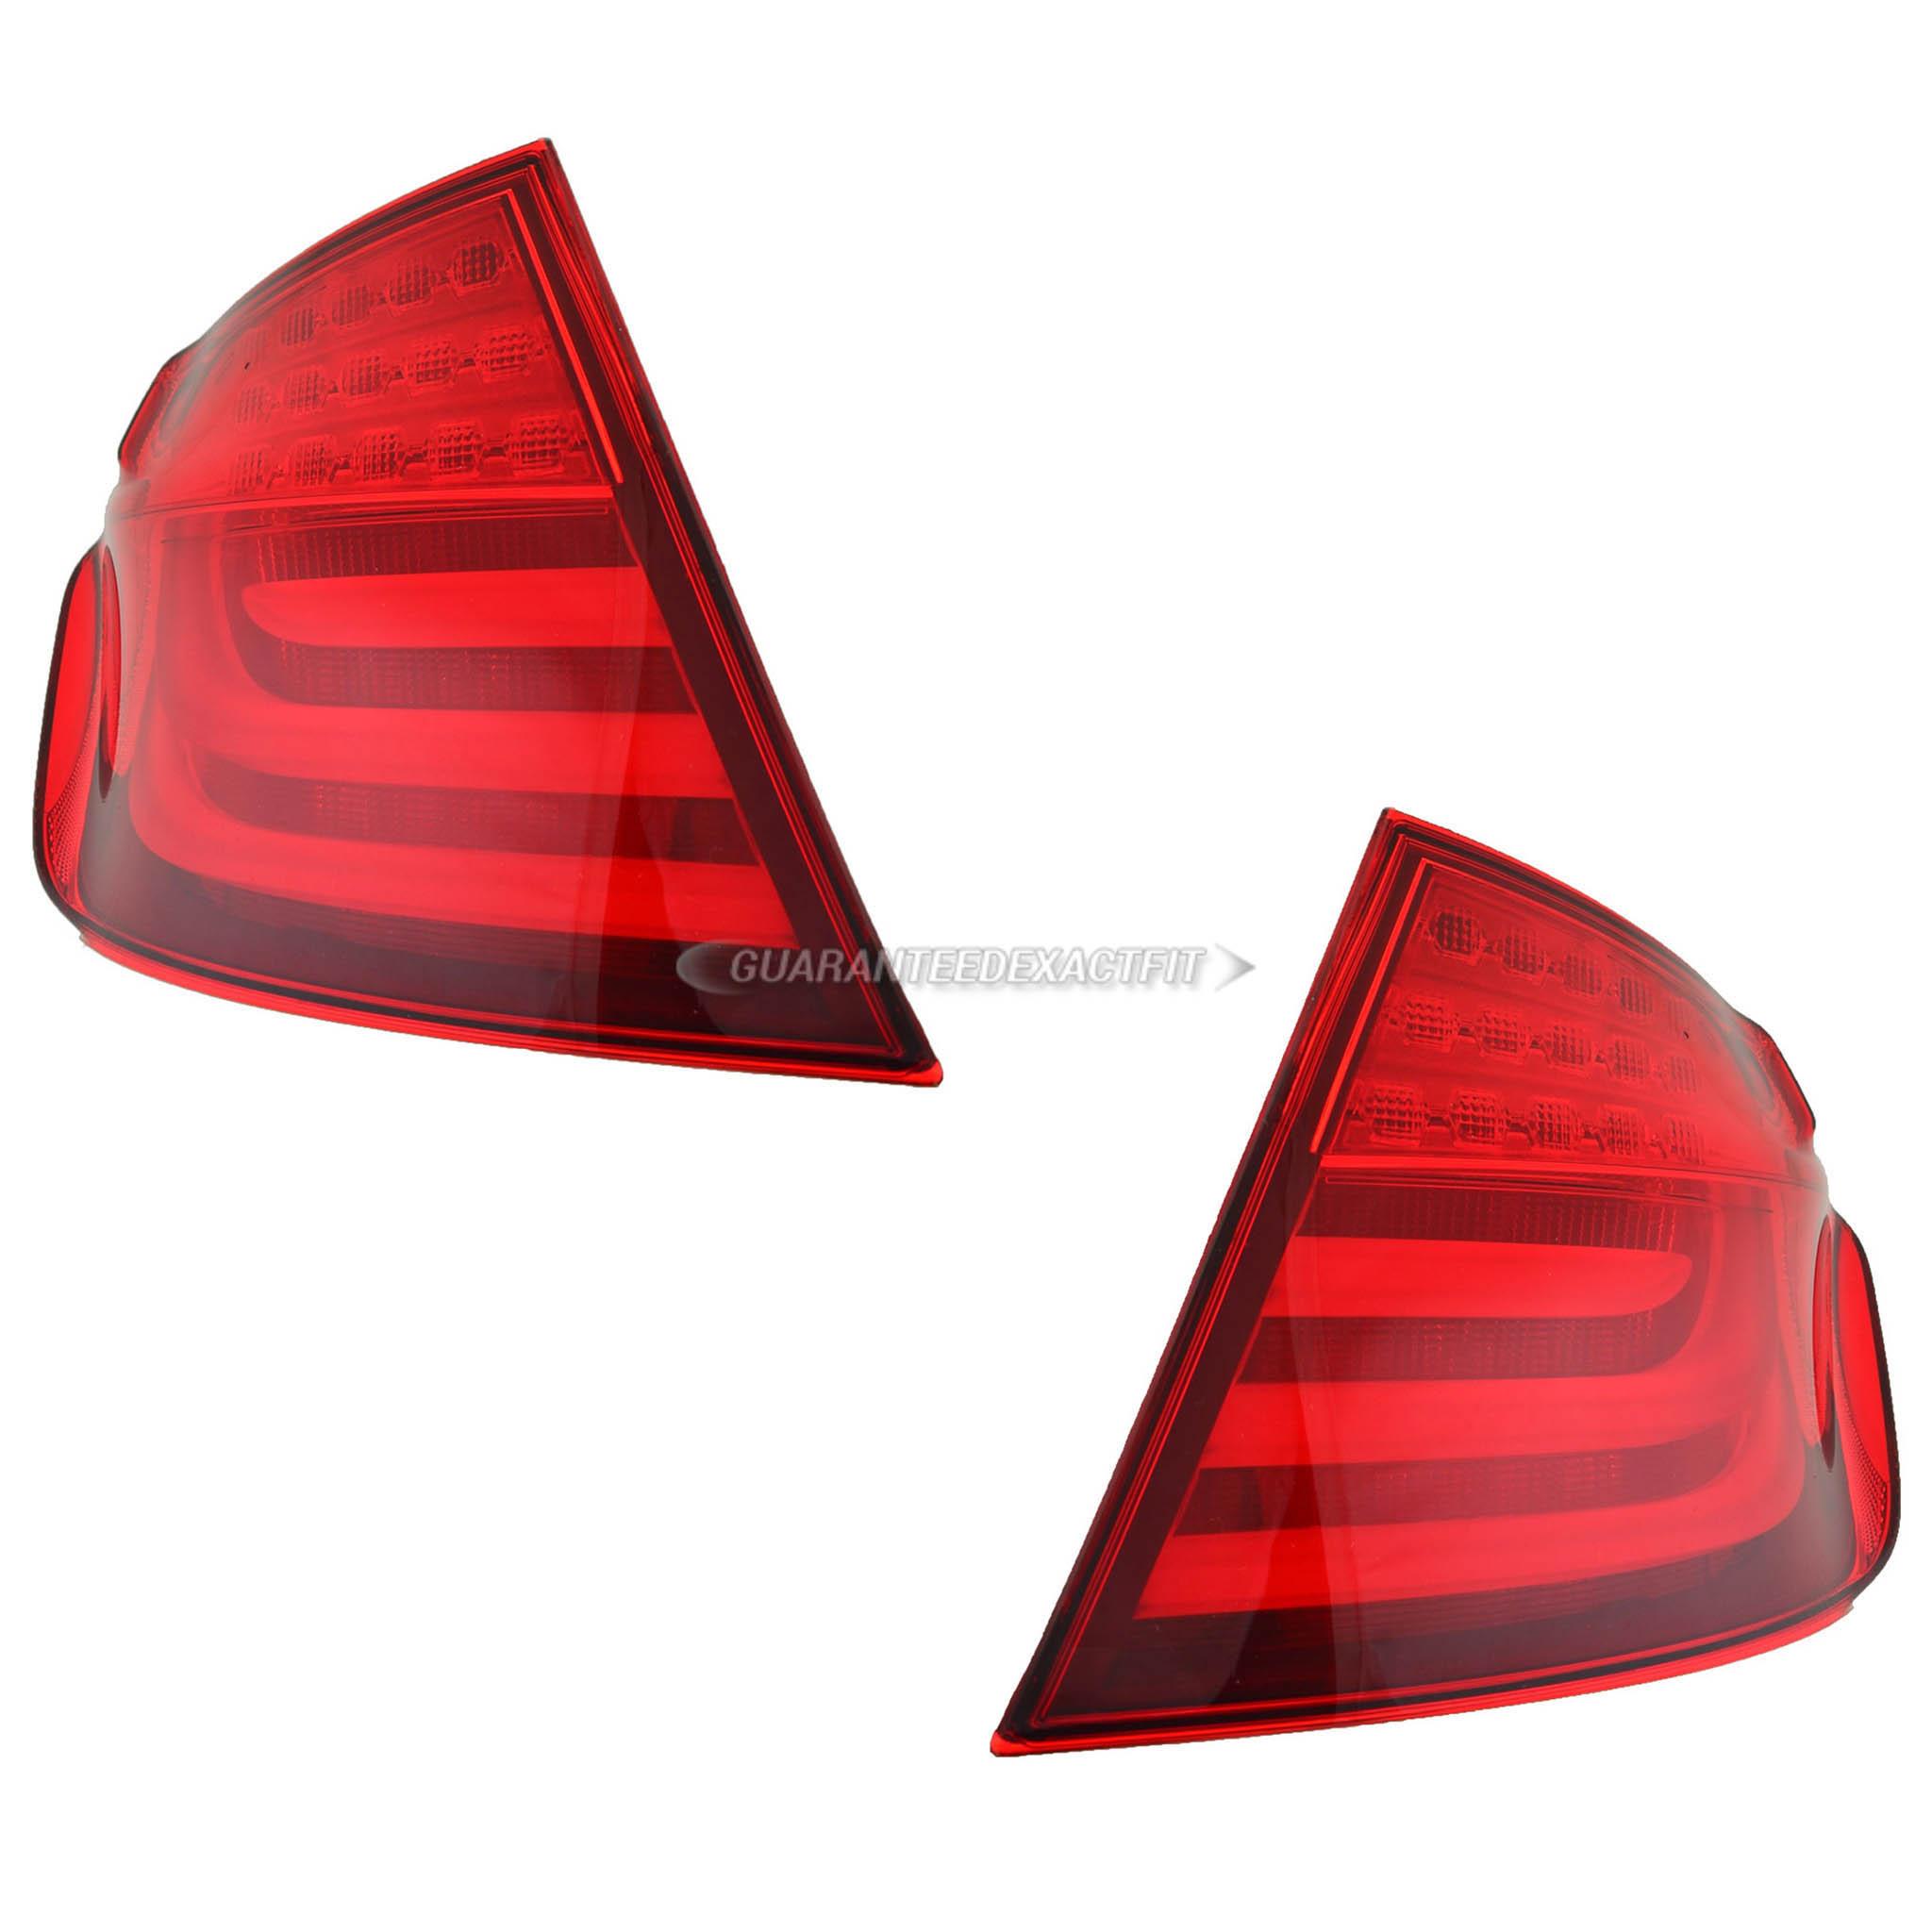 2012 Bmw 528 tail light assembly pair 